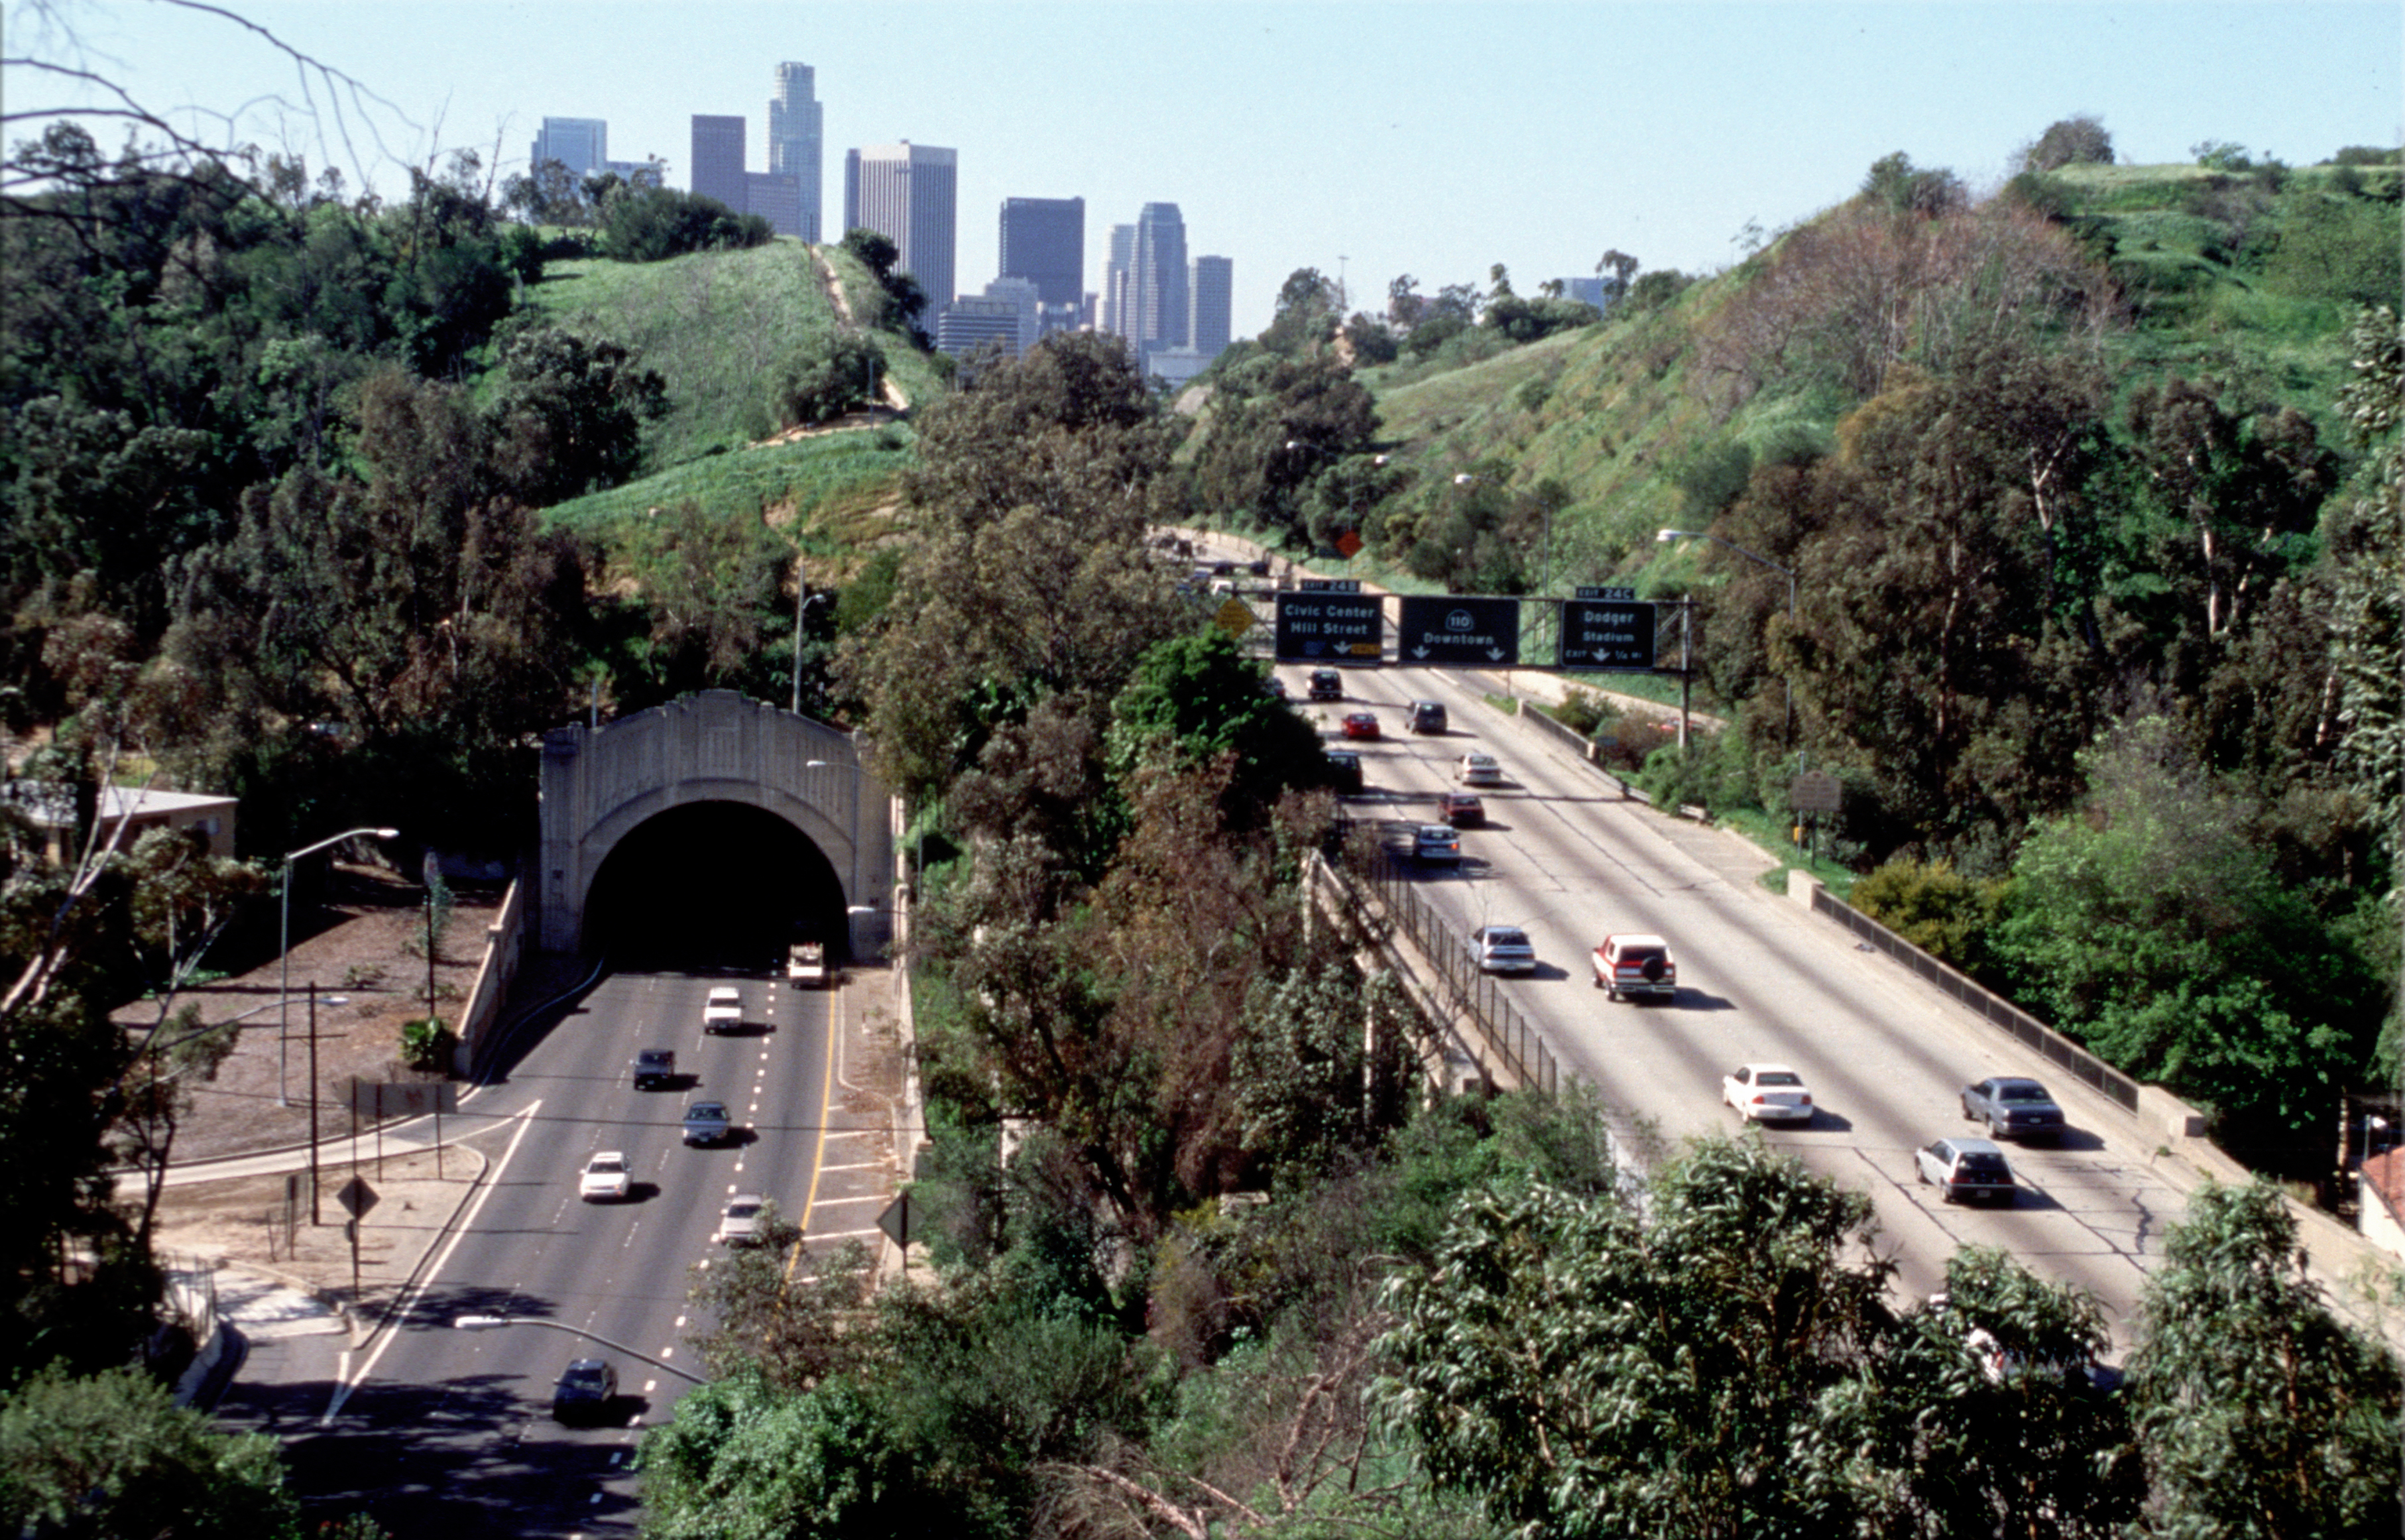 California opens its first freeway, the Arroyo Seco Parkway